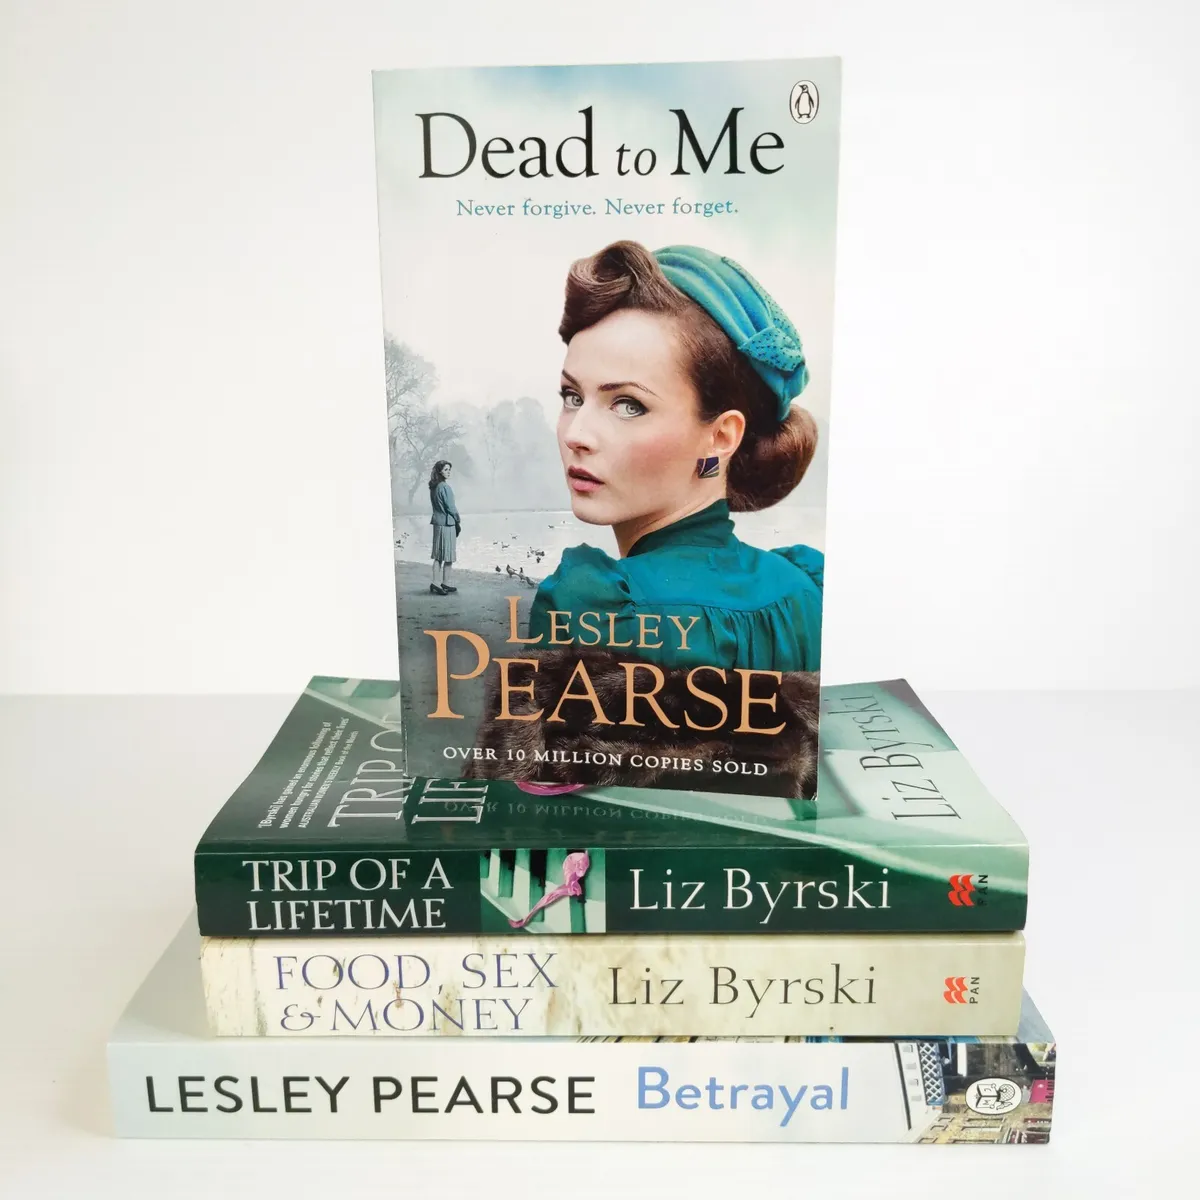 Dead to Me by Lesley Pearse